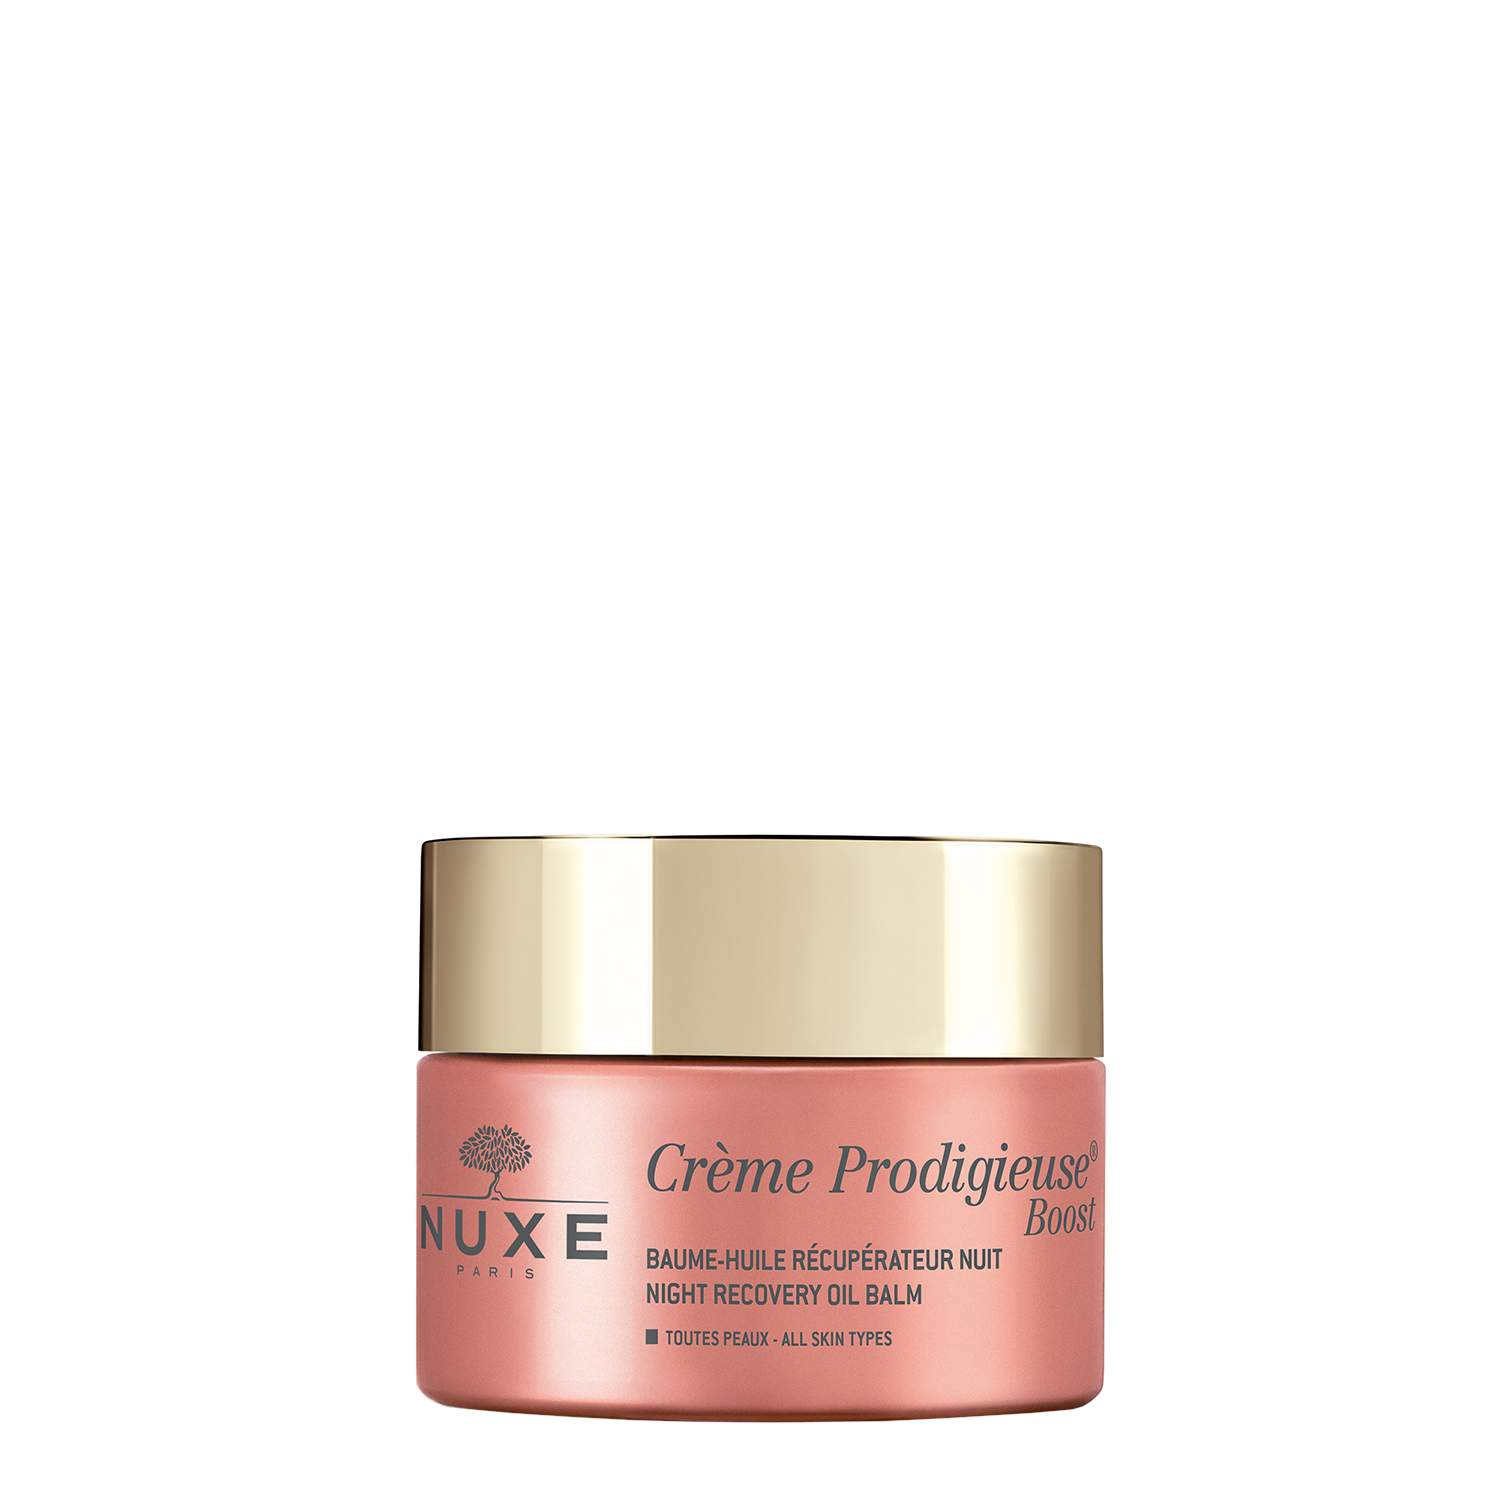 NUXE Crème Prodigieuse® Boost Night Recovery Oil Balm  1